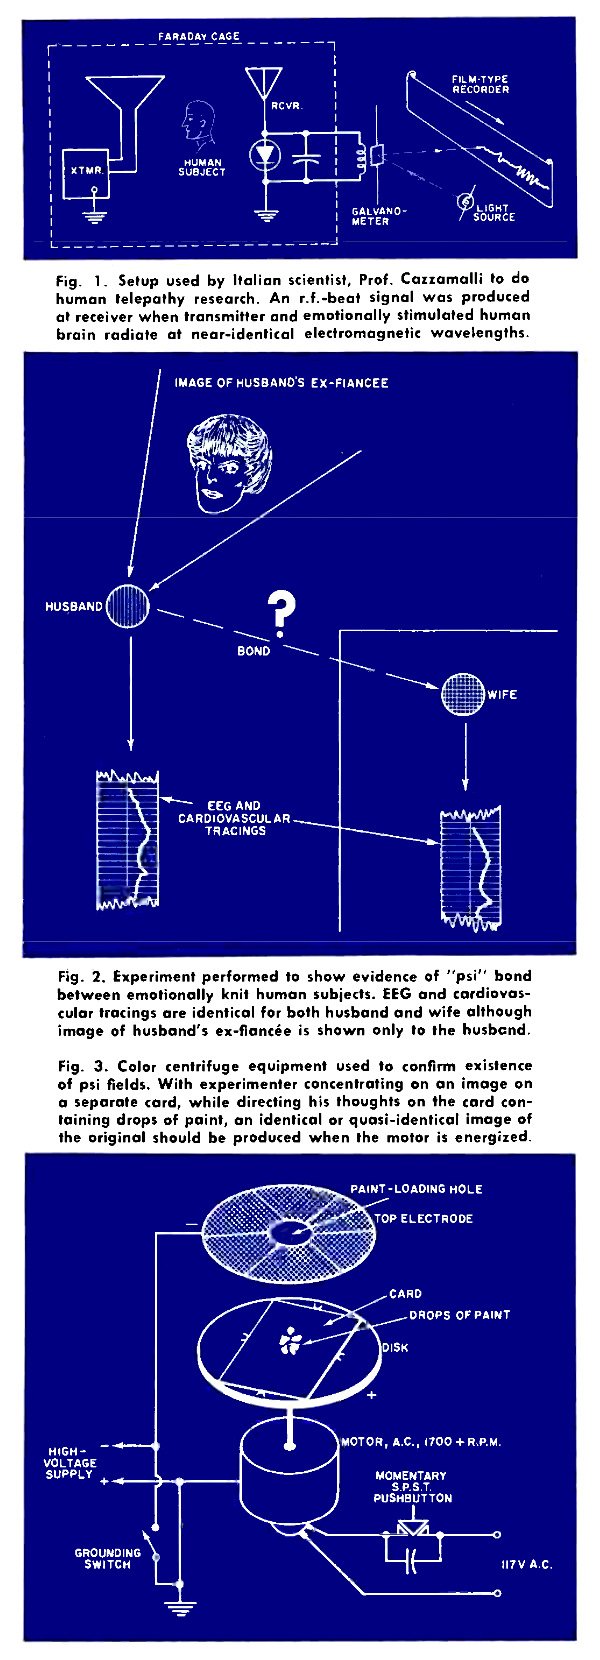 Fig. 1. Setup used by Italian scientist, Prof. Cazzamali to do human telepathy research. An r.f.-beat signal was produced at receiver when transmitter and emotionally stimulated human brain radiate at near-identical electromagnetic wavelengths.; Fig. 2. Experiment performed to show evidence of "psi" bond between emotionally knit human subjects. EEG and cariovascular tracings are identical for both husband and wife although image of husband's ex-fiancee is shown only to the husband.; Fig. 3. Color centrifuge equipment used to confirm existence of psi fields. With experimenter concentrating on an image on a separate card, while directing his thoughts on the card containing drops of paint, an identical or quasi-identical image of the original should be produced when the motor is energized.